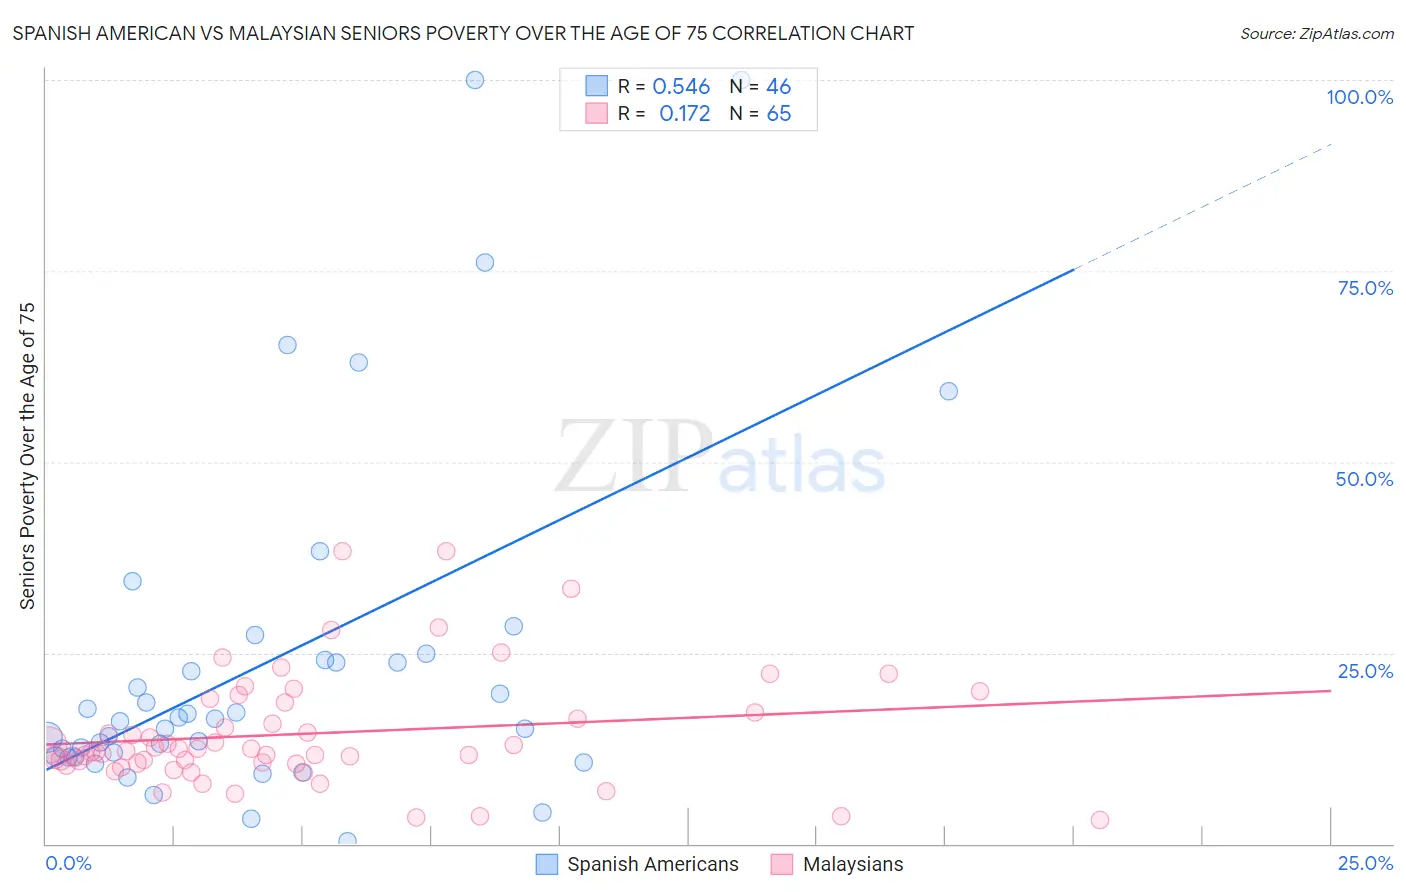 Spanish American vs Malaysian Seniors Poverty Over the Age of 75